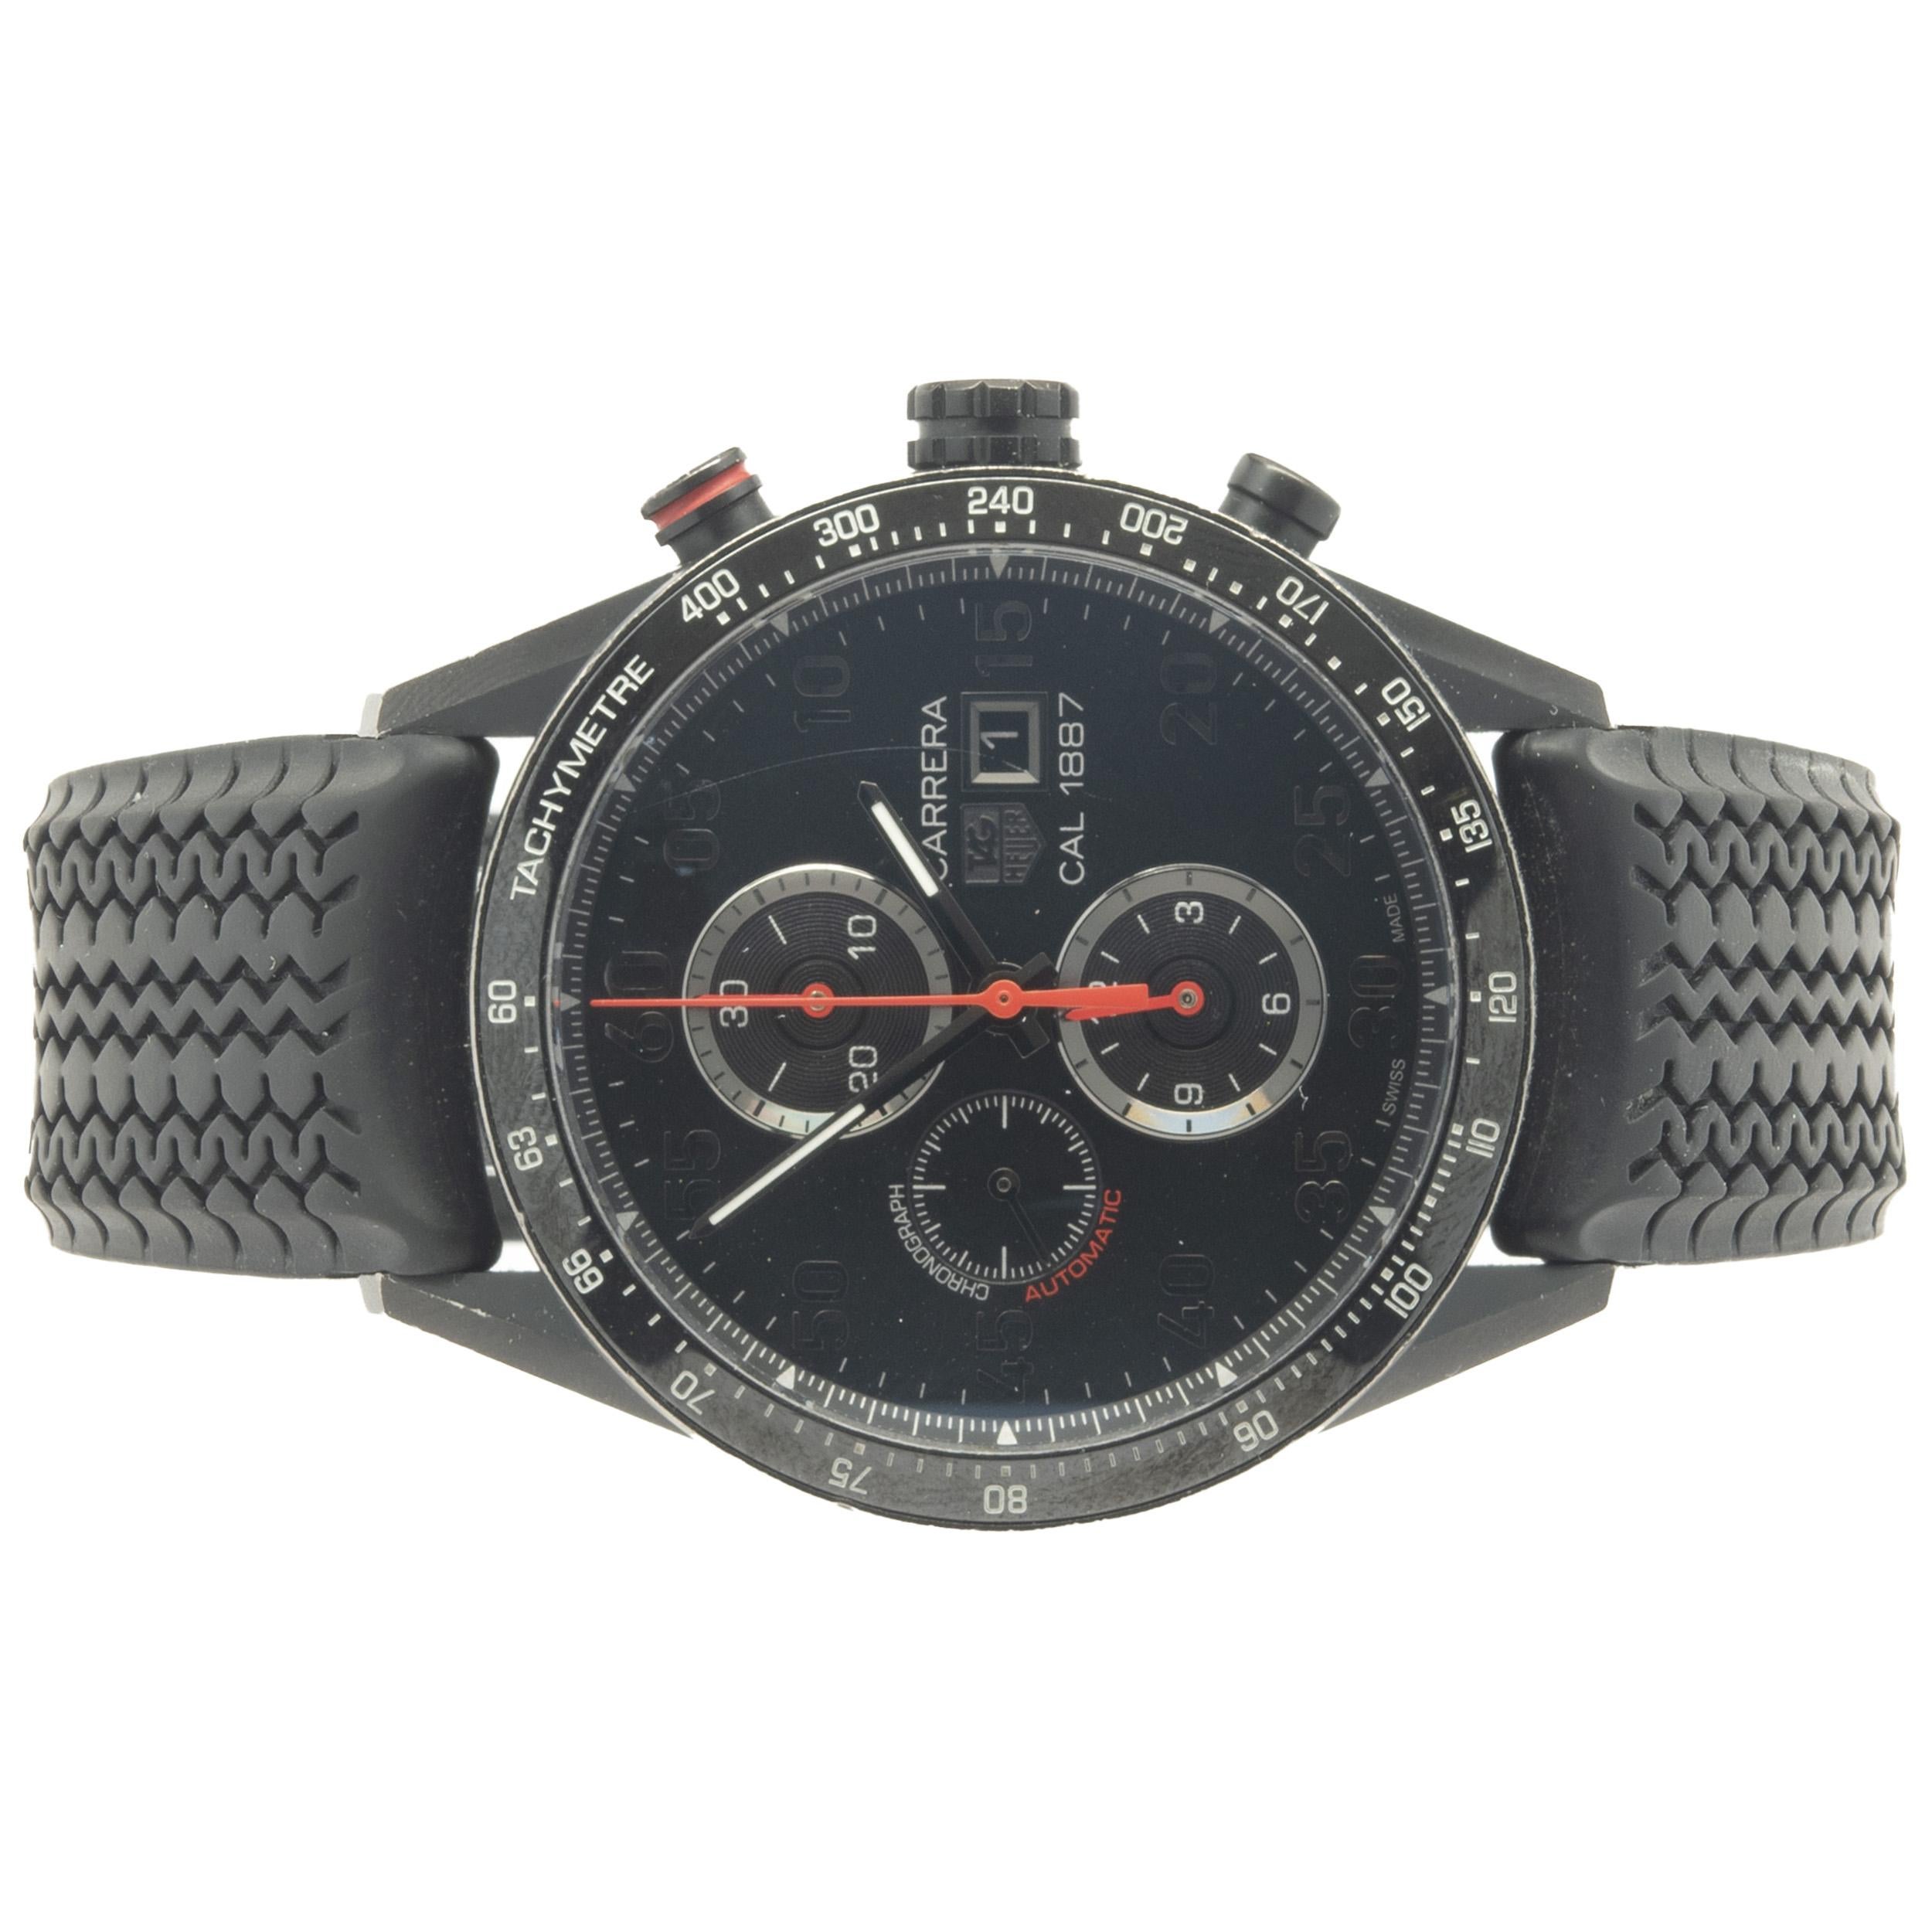 Movement: automatic
Function: hours, minutes, seconds, date, chronograph
Case: 43mm round case, push/pull crown, sapphire crystal, ceramic tachymeter
Dial: black chronograph
Band: black rubber, deployment clasp
Reference#: CAR2A80
Serial #: